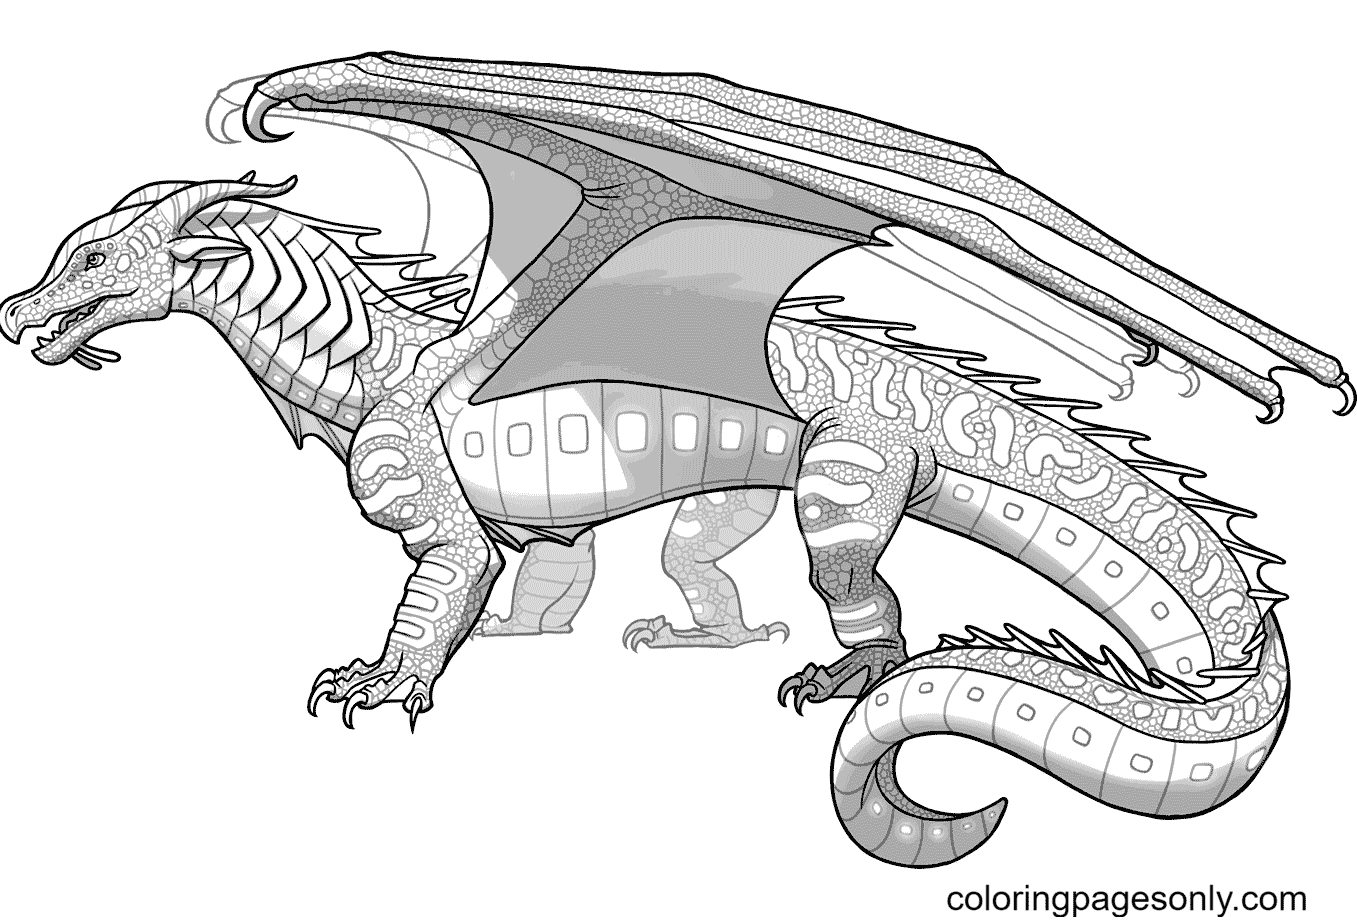 Seawings Dragon from Wings of Fire Coloring Page